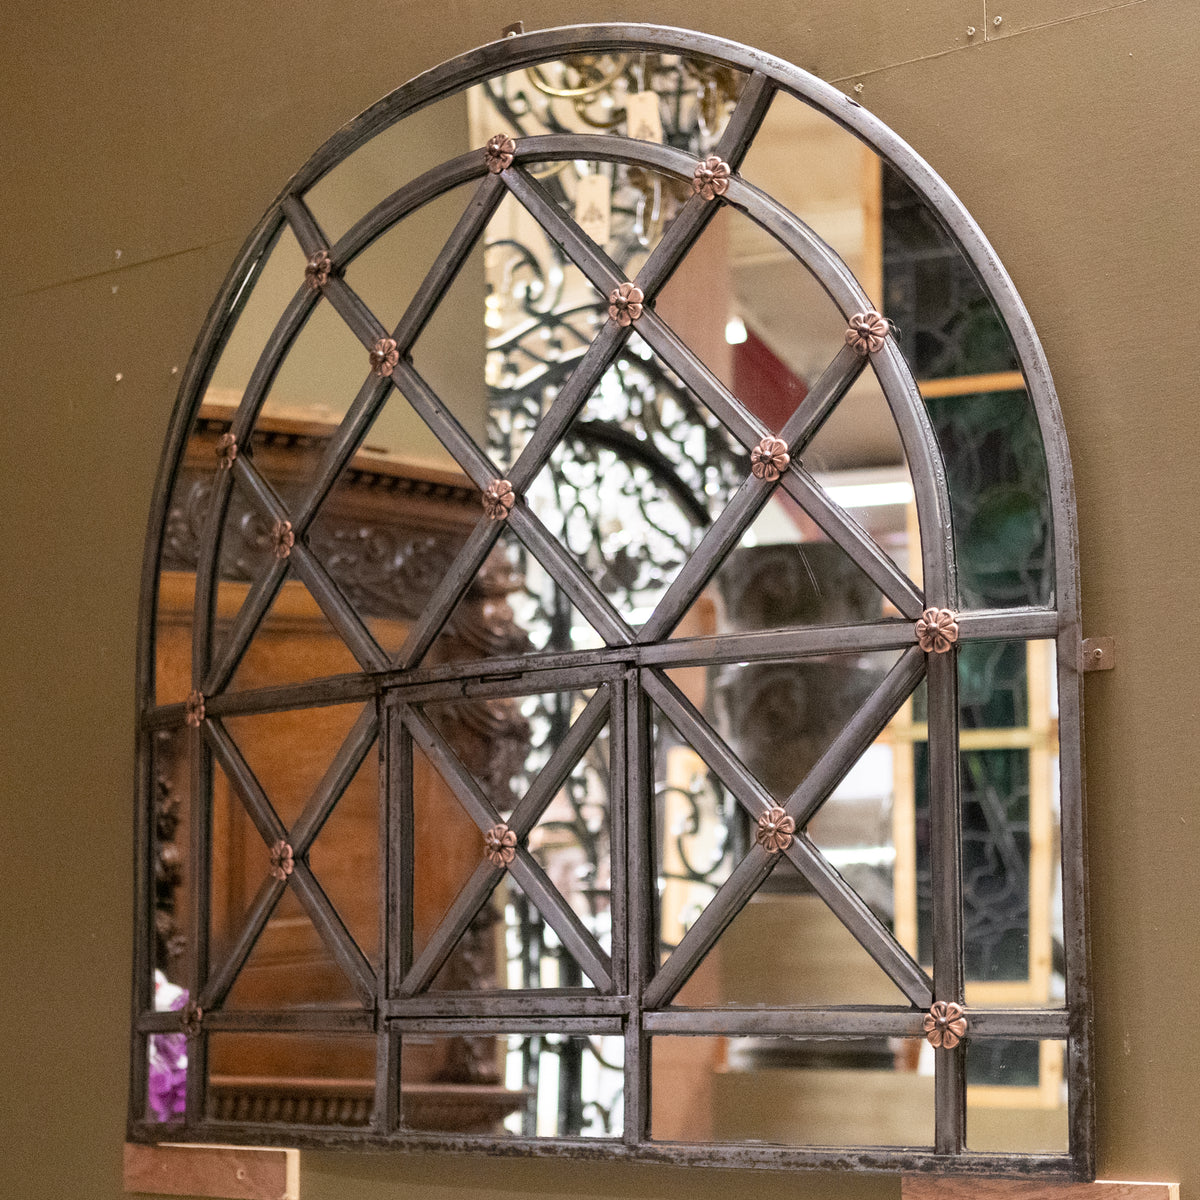 Transformed Antique Tate Britain Gallery Window Frame Mirror | The Architectural Forum